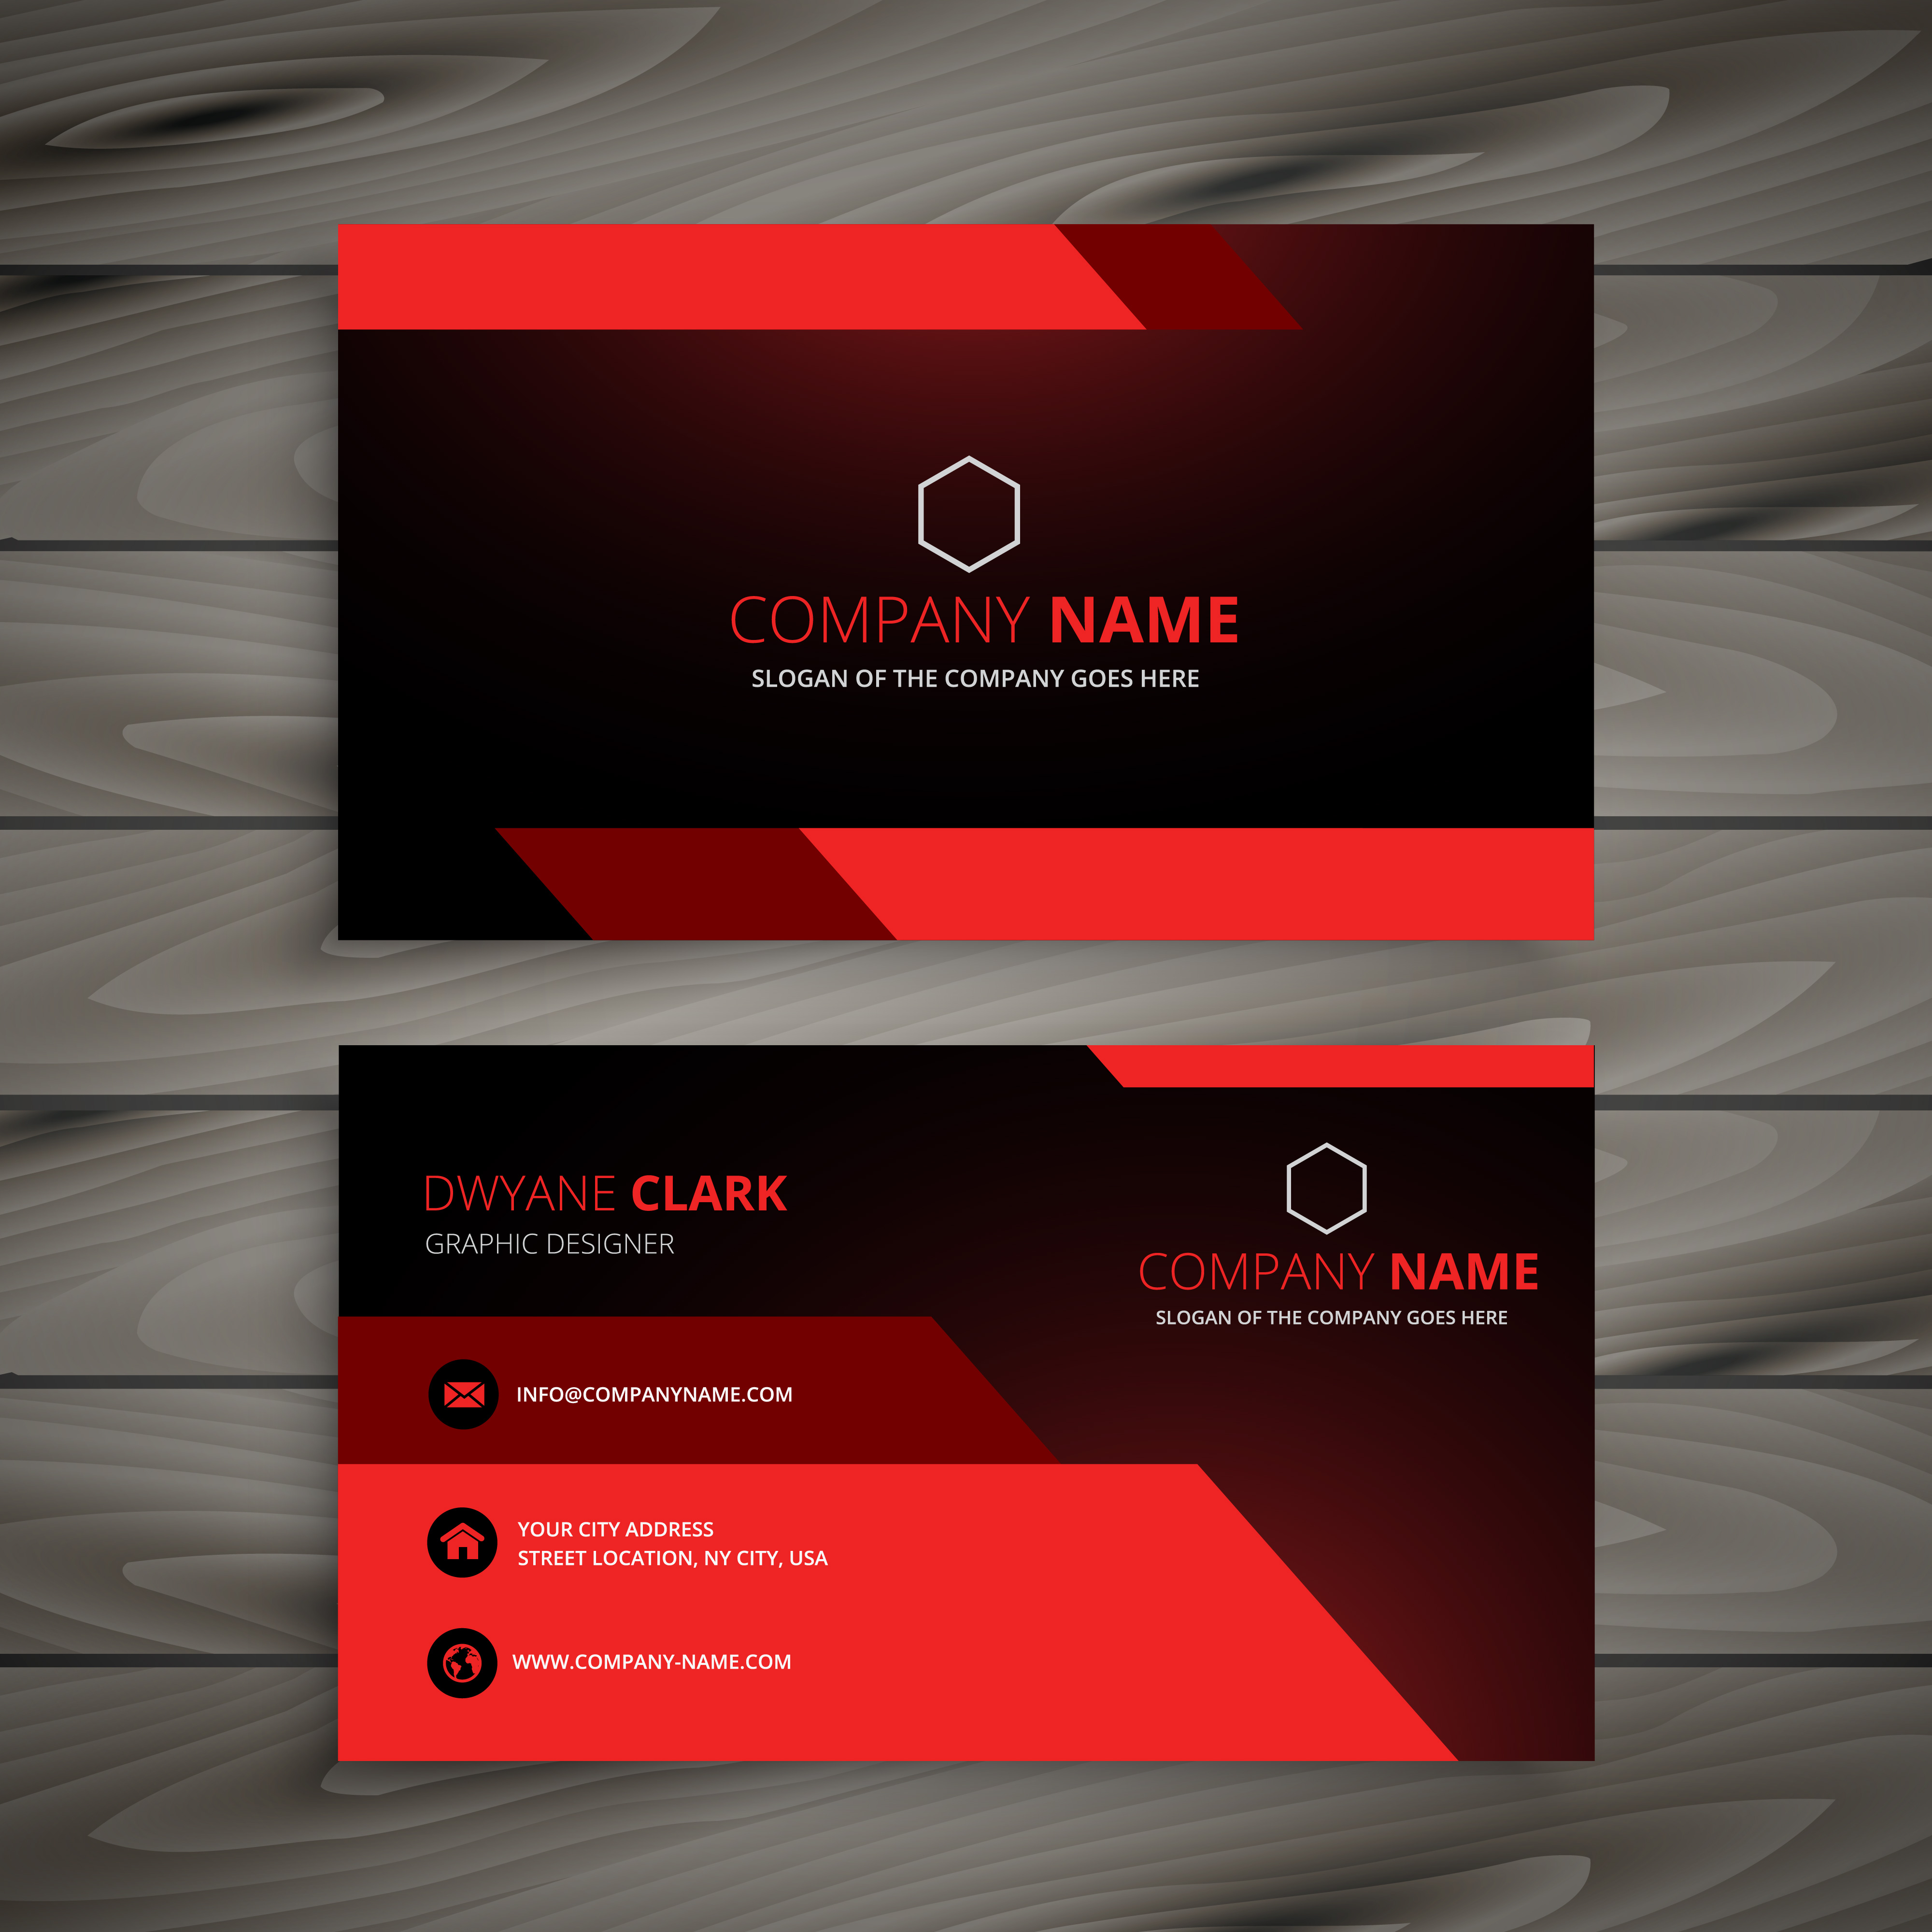 red business card template vector design illustration - Download Free